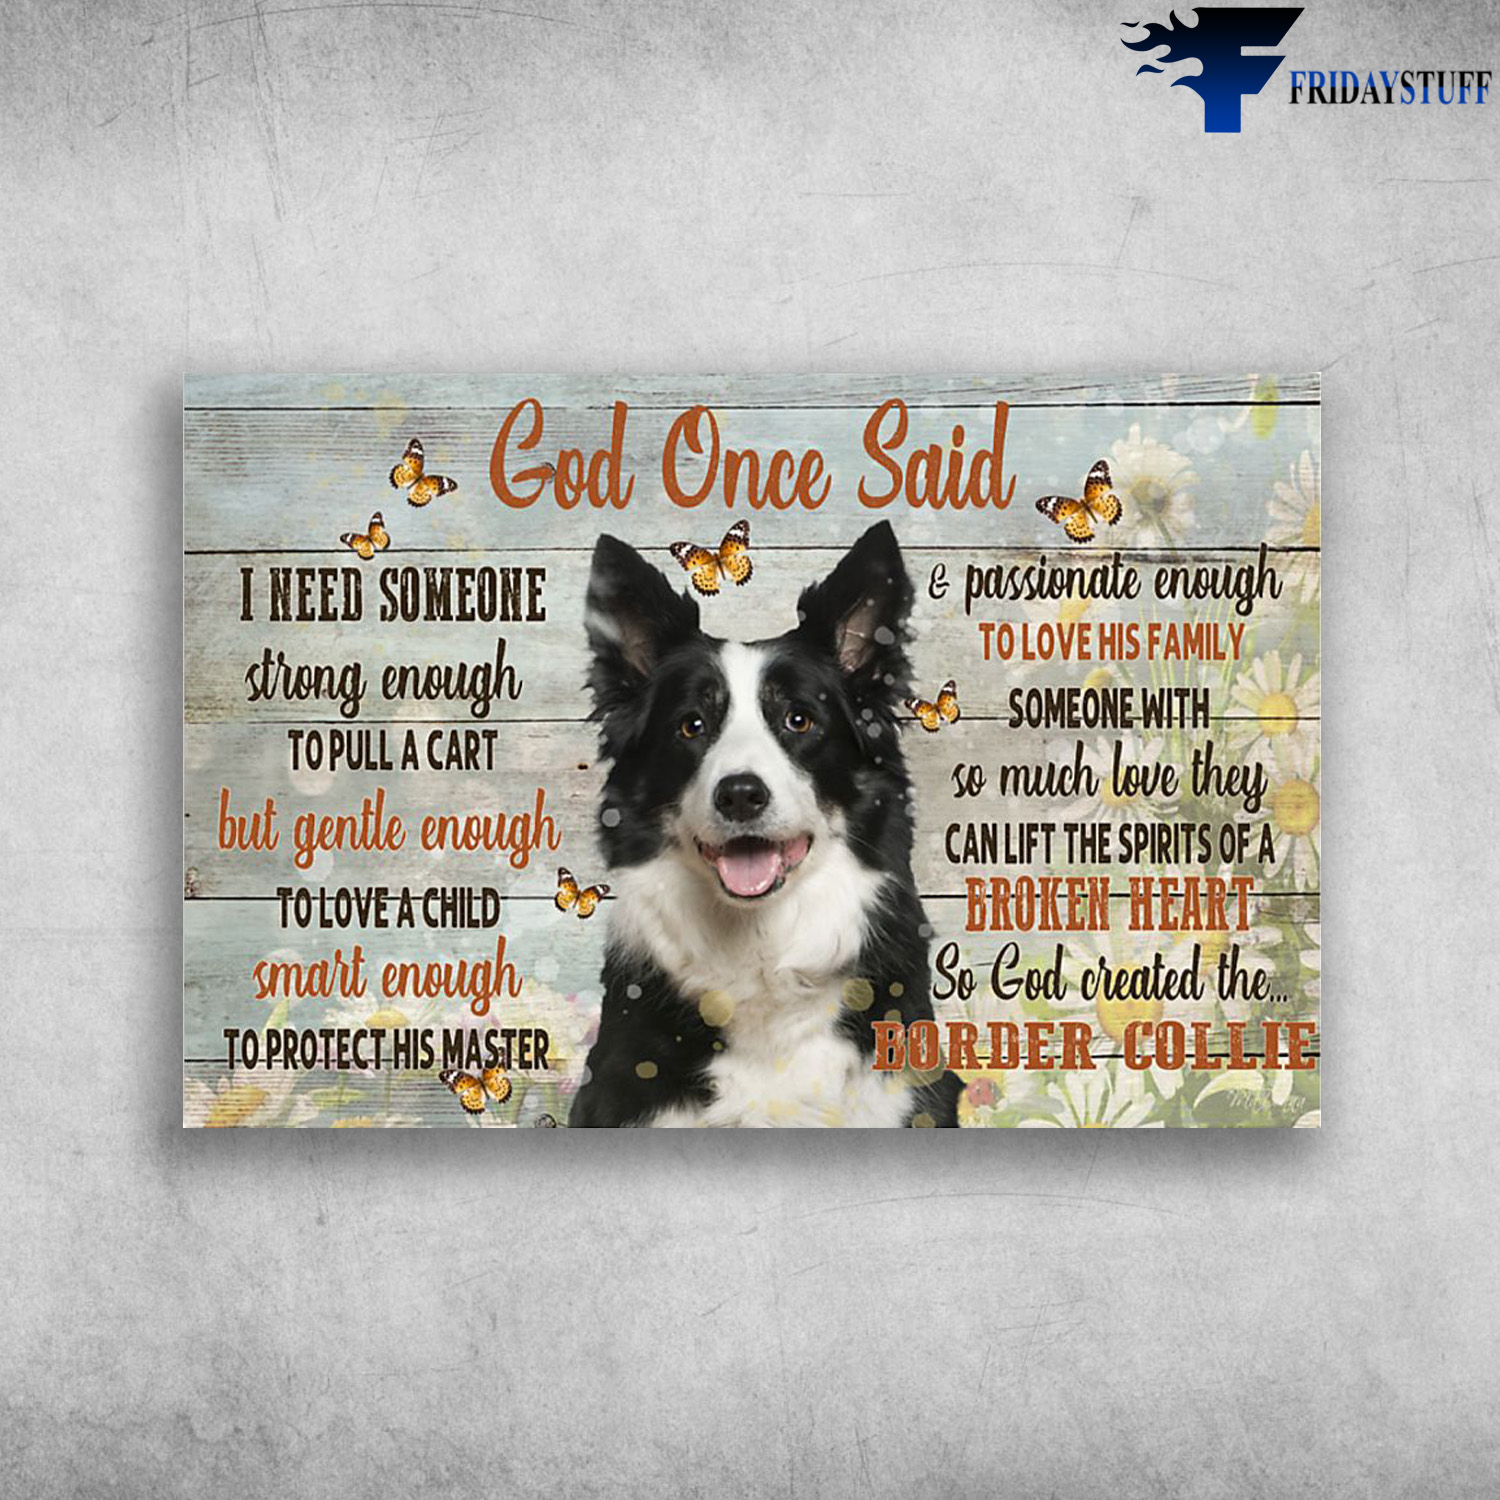 Border Collie - God Once Said, I Need Someone Strong Enough To Pull A Cart, But Gentle Enough To Love A Child, Smart Enough To Protect His Master, Passionate Enough To Love His Family, Someone With So Much Love They Can Lift The Spirits